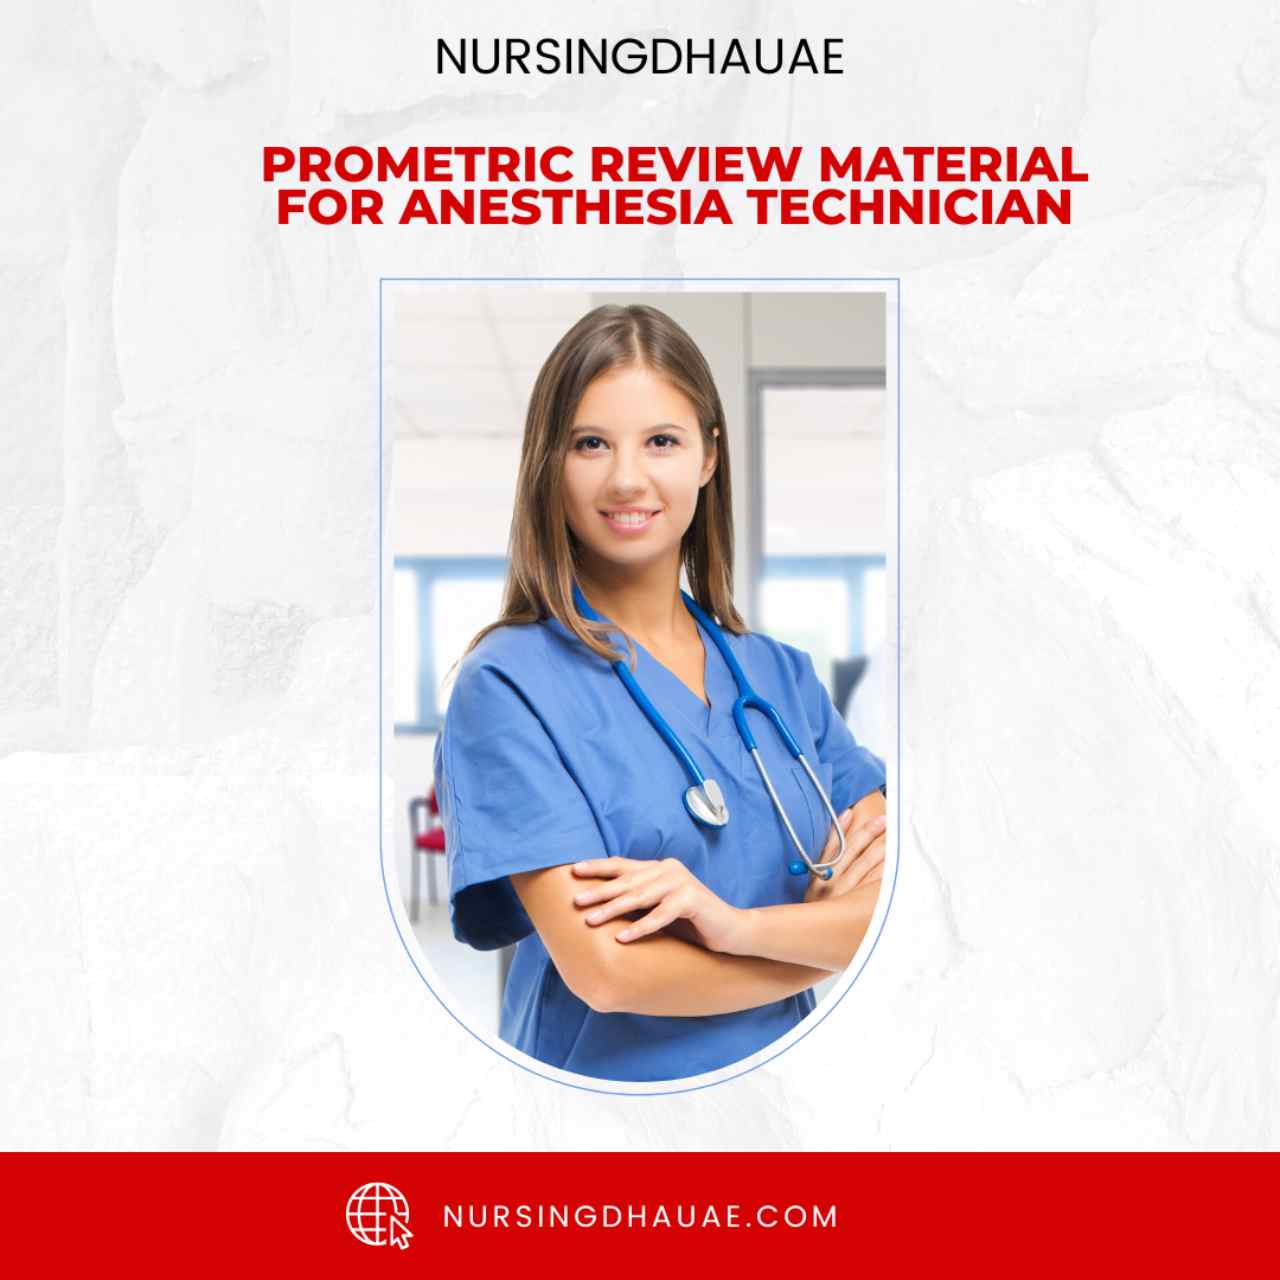 Prometric Review material for Anesthesia Technician